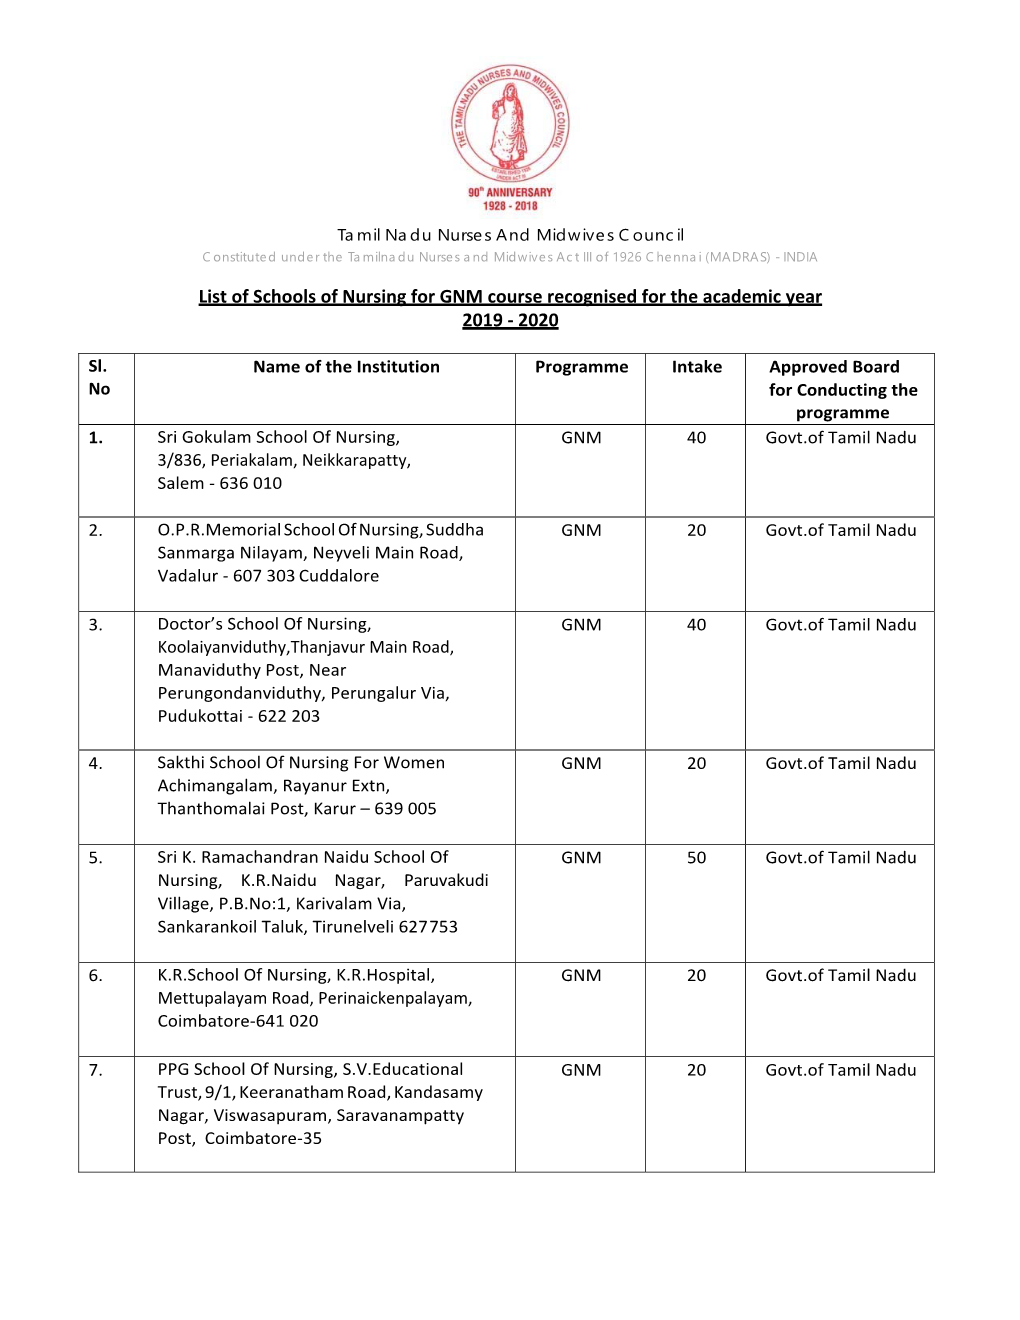 List of Schools of Nursing for GNM Course Recognised for the Academic Year 2019 - 2020